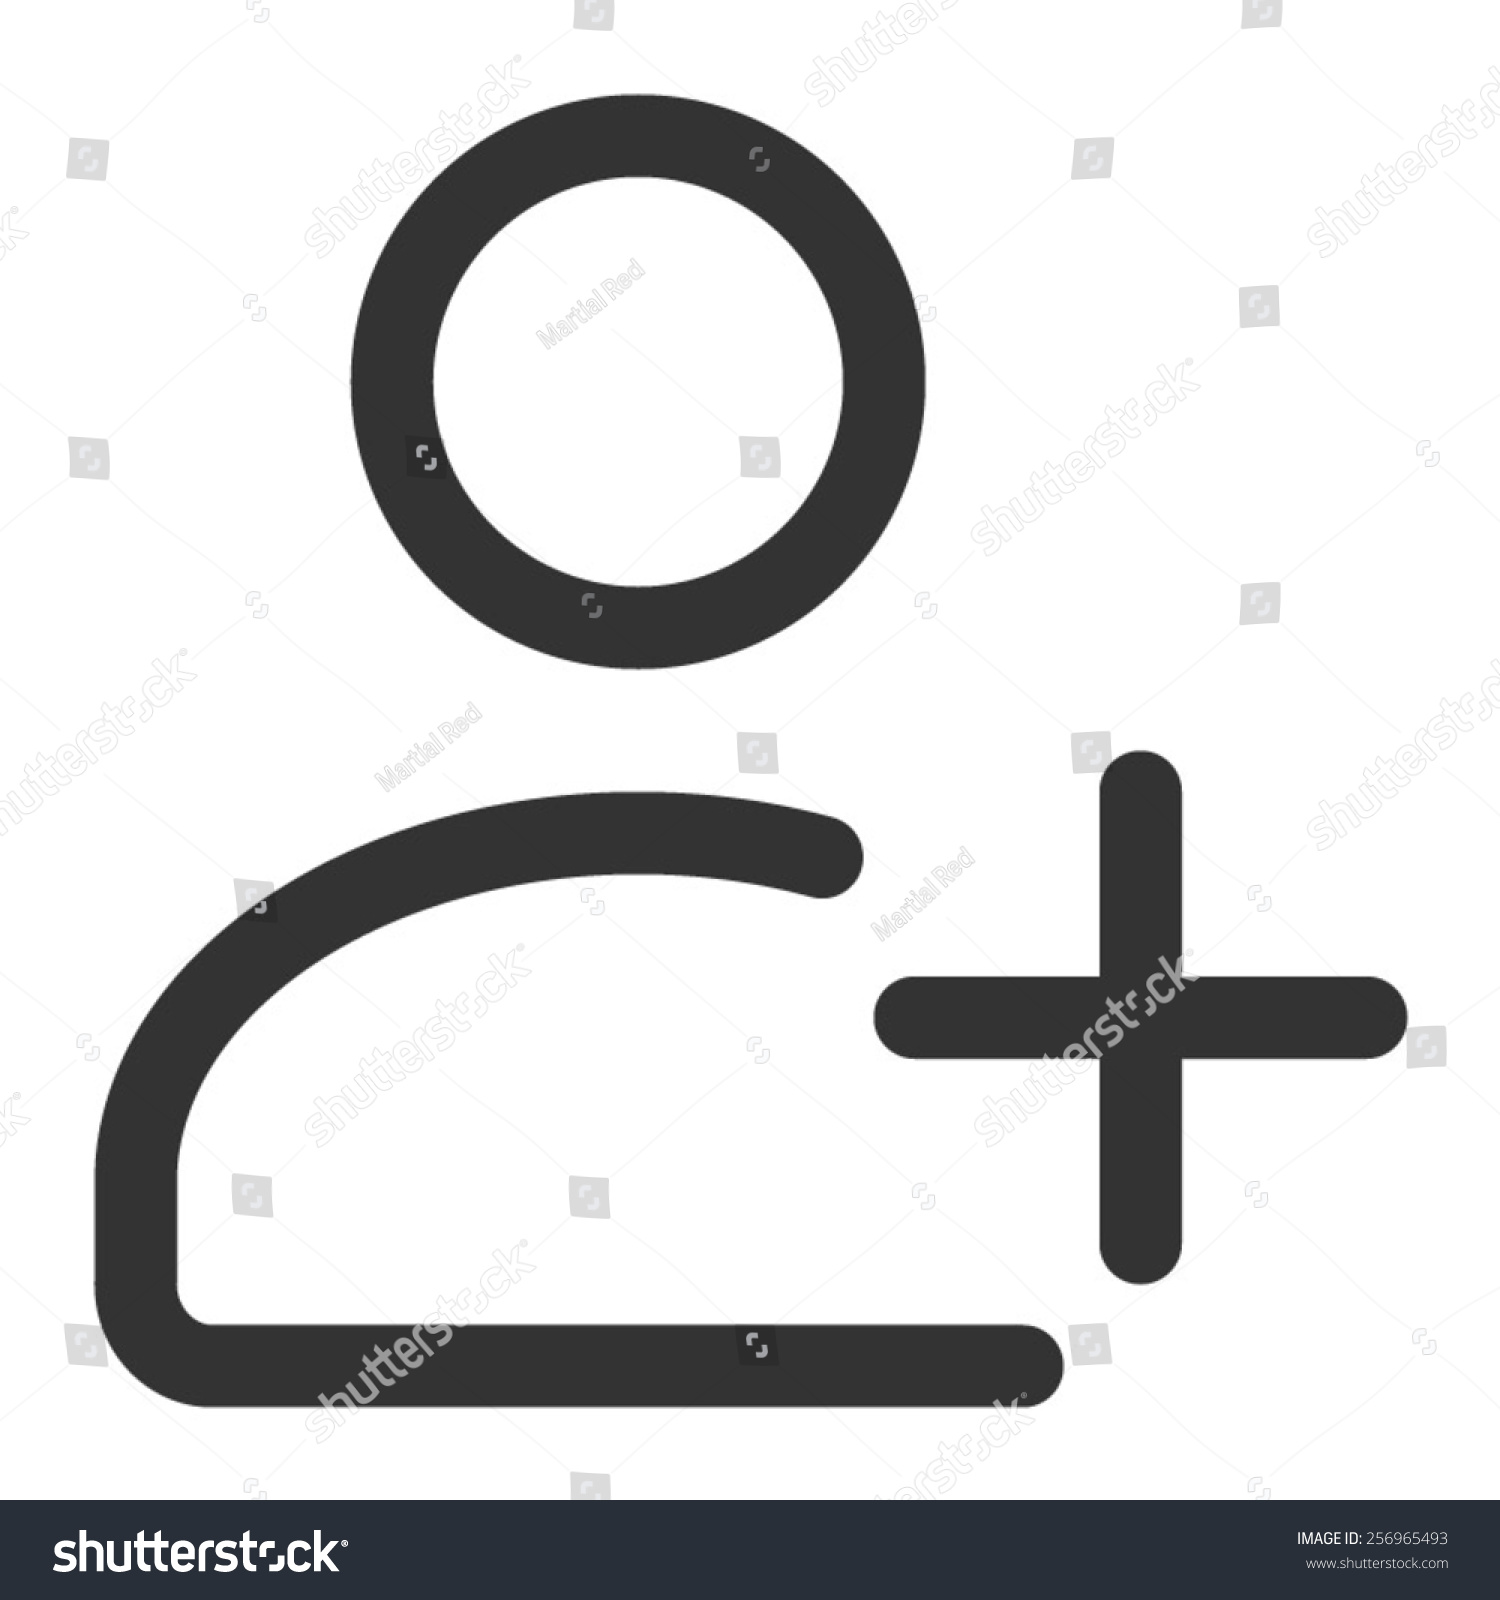 CREATE ACCOUNT ICON Stock image and royalty-free vector files on 